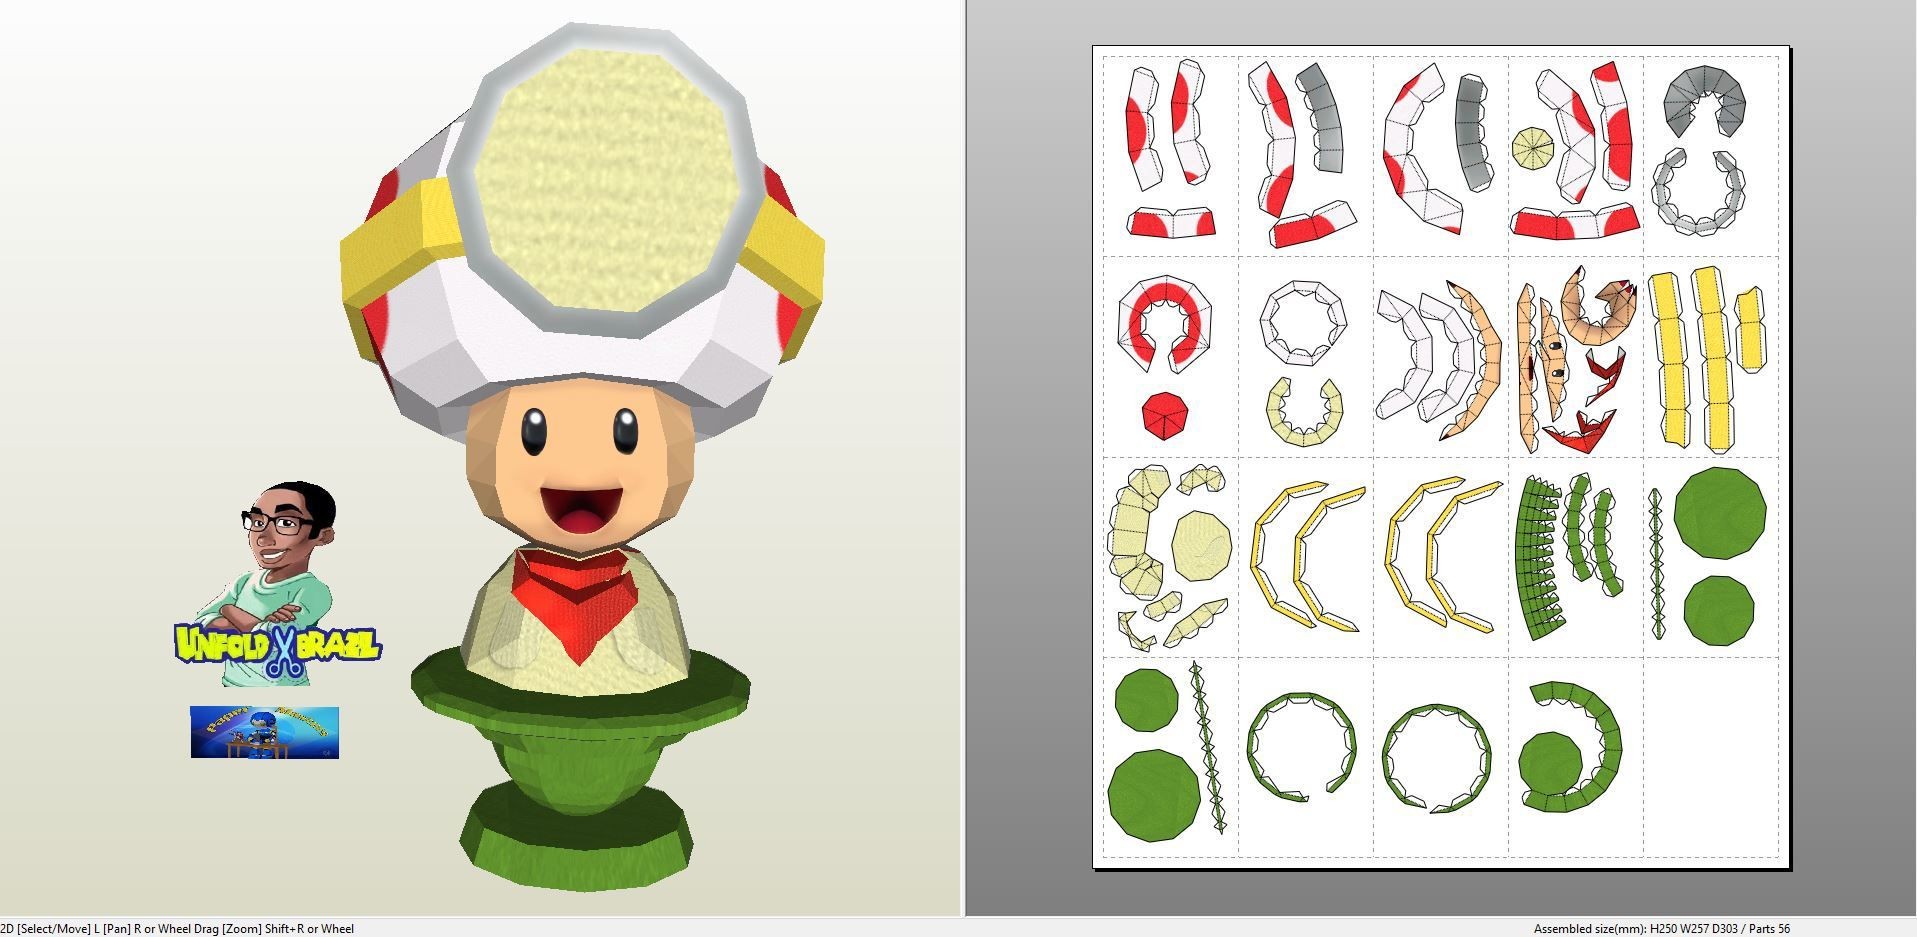 Vegeta Papercraft Papercraft Pdo File Template for Super Mario Captain toad Bust